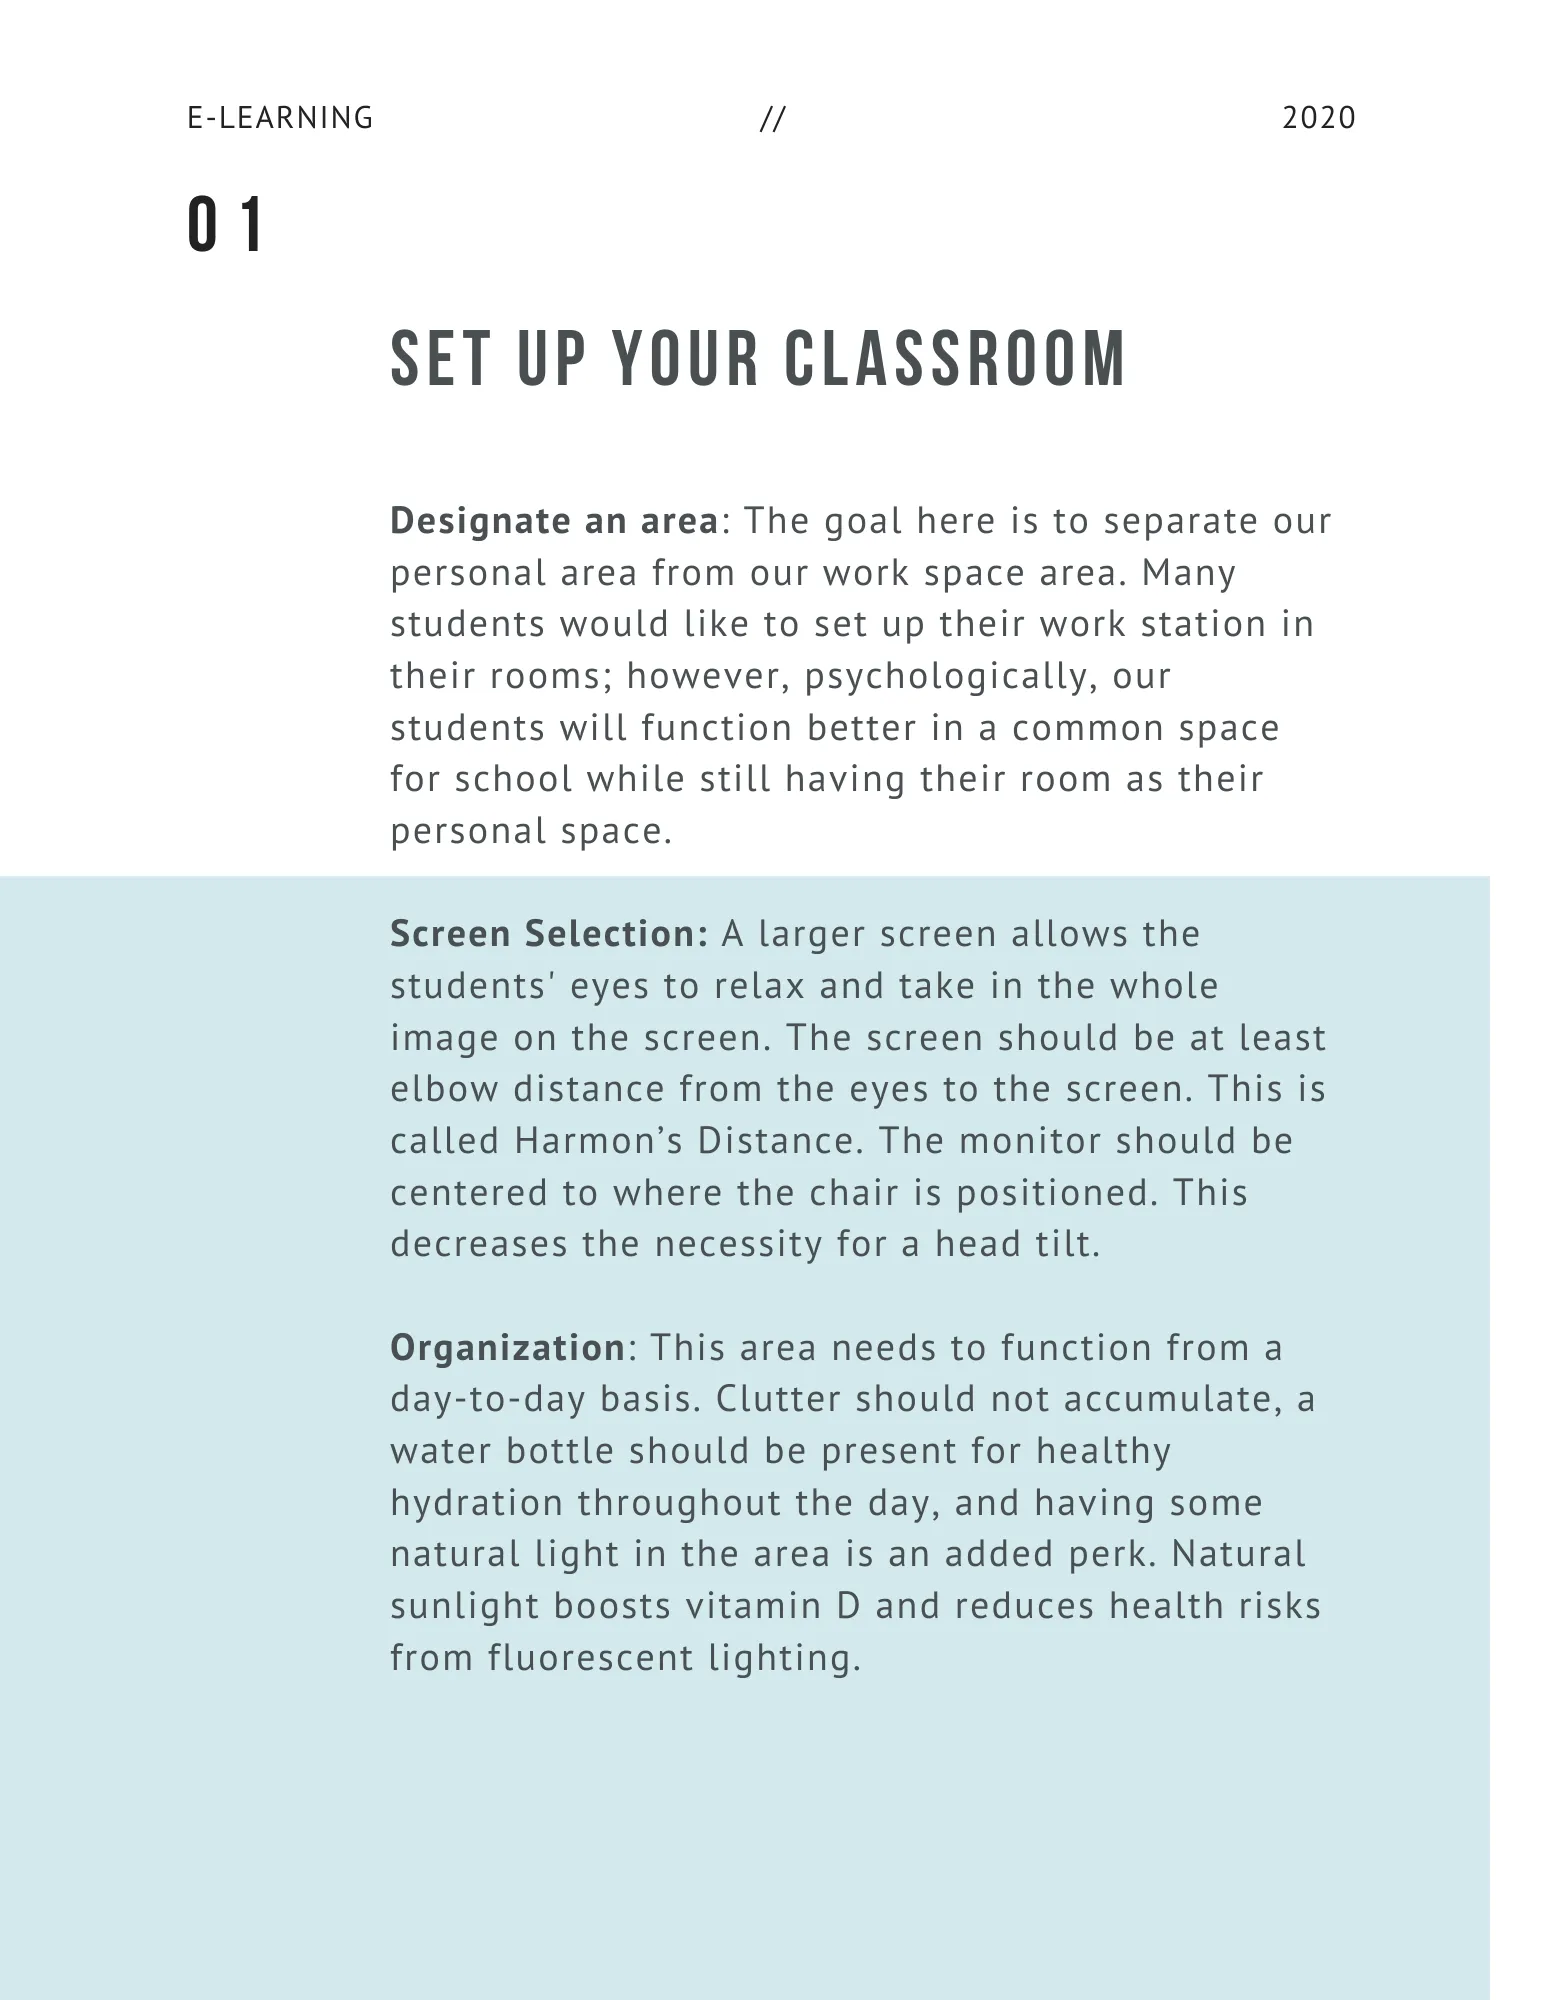 Set Up Your Classroom